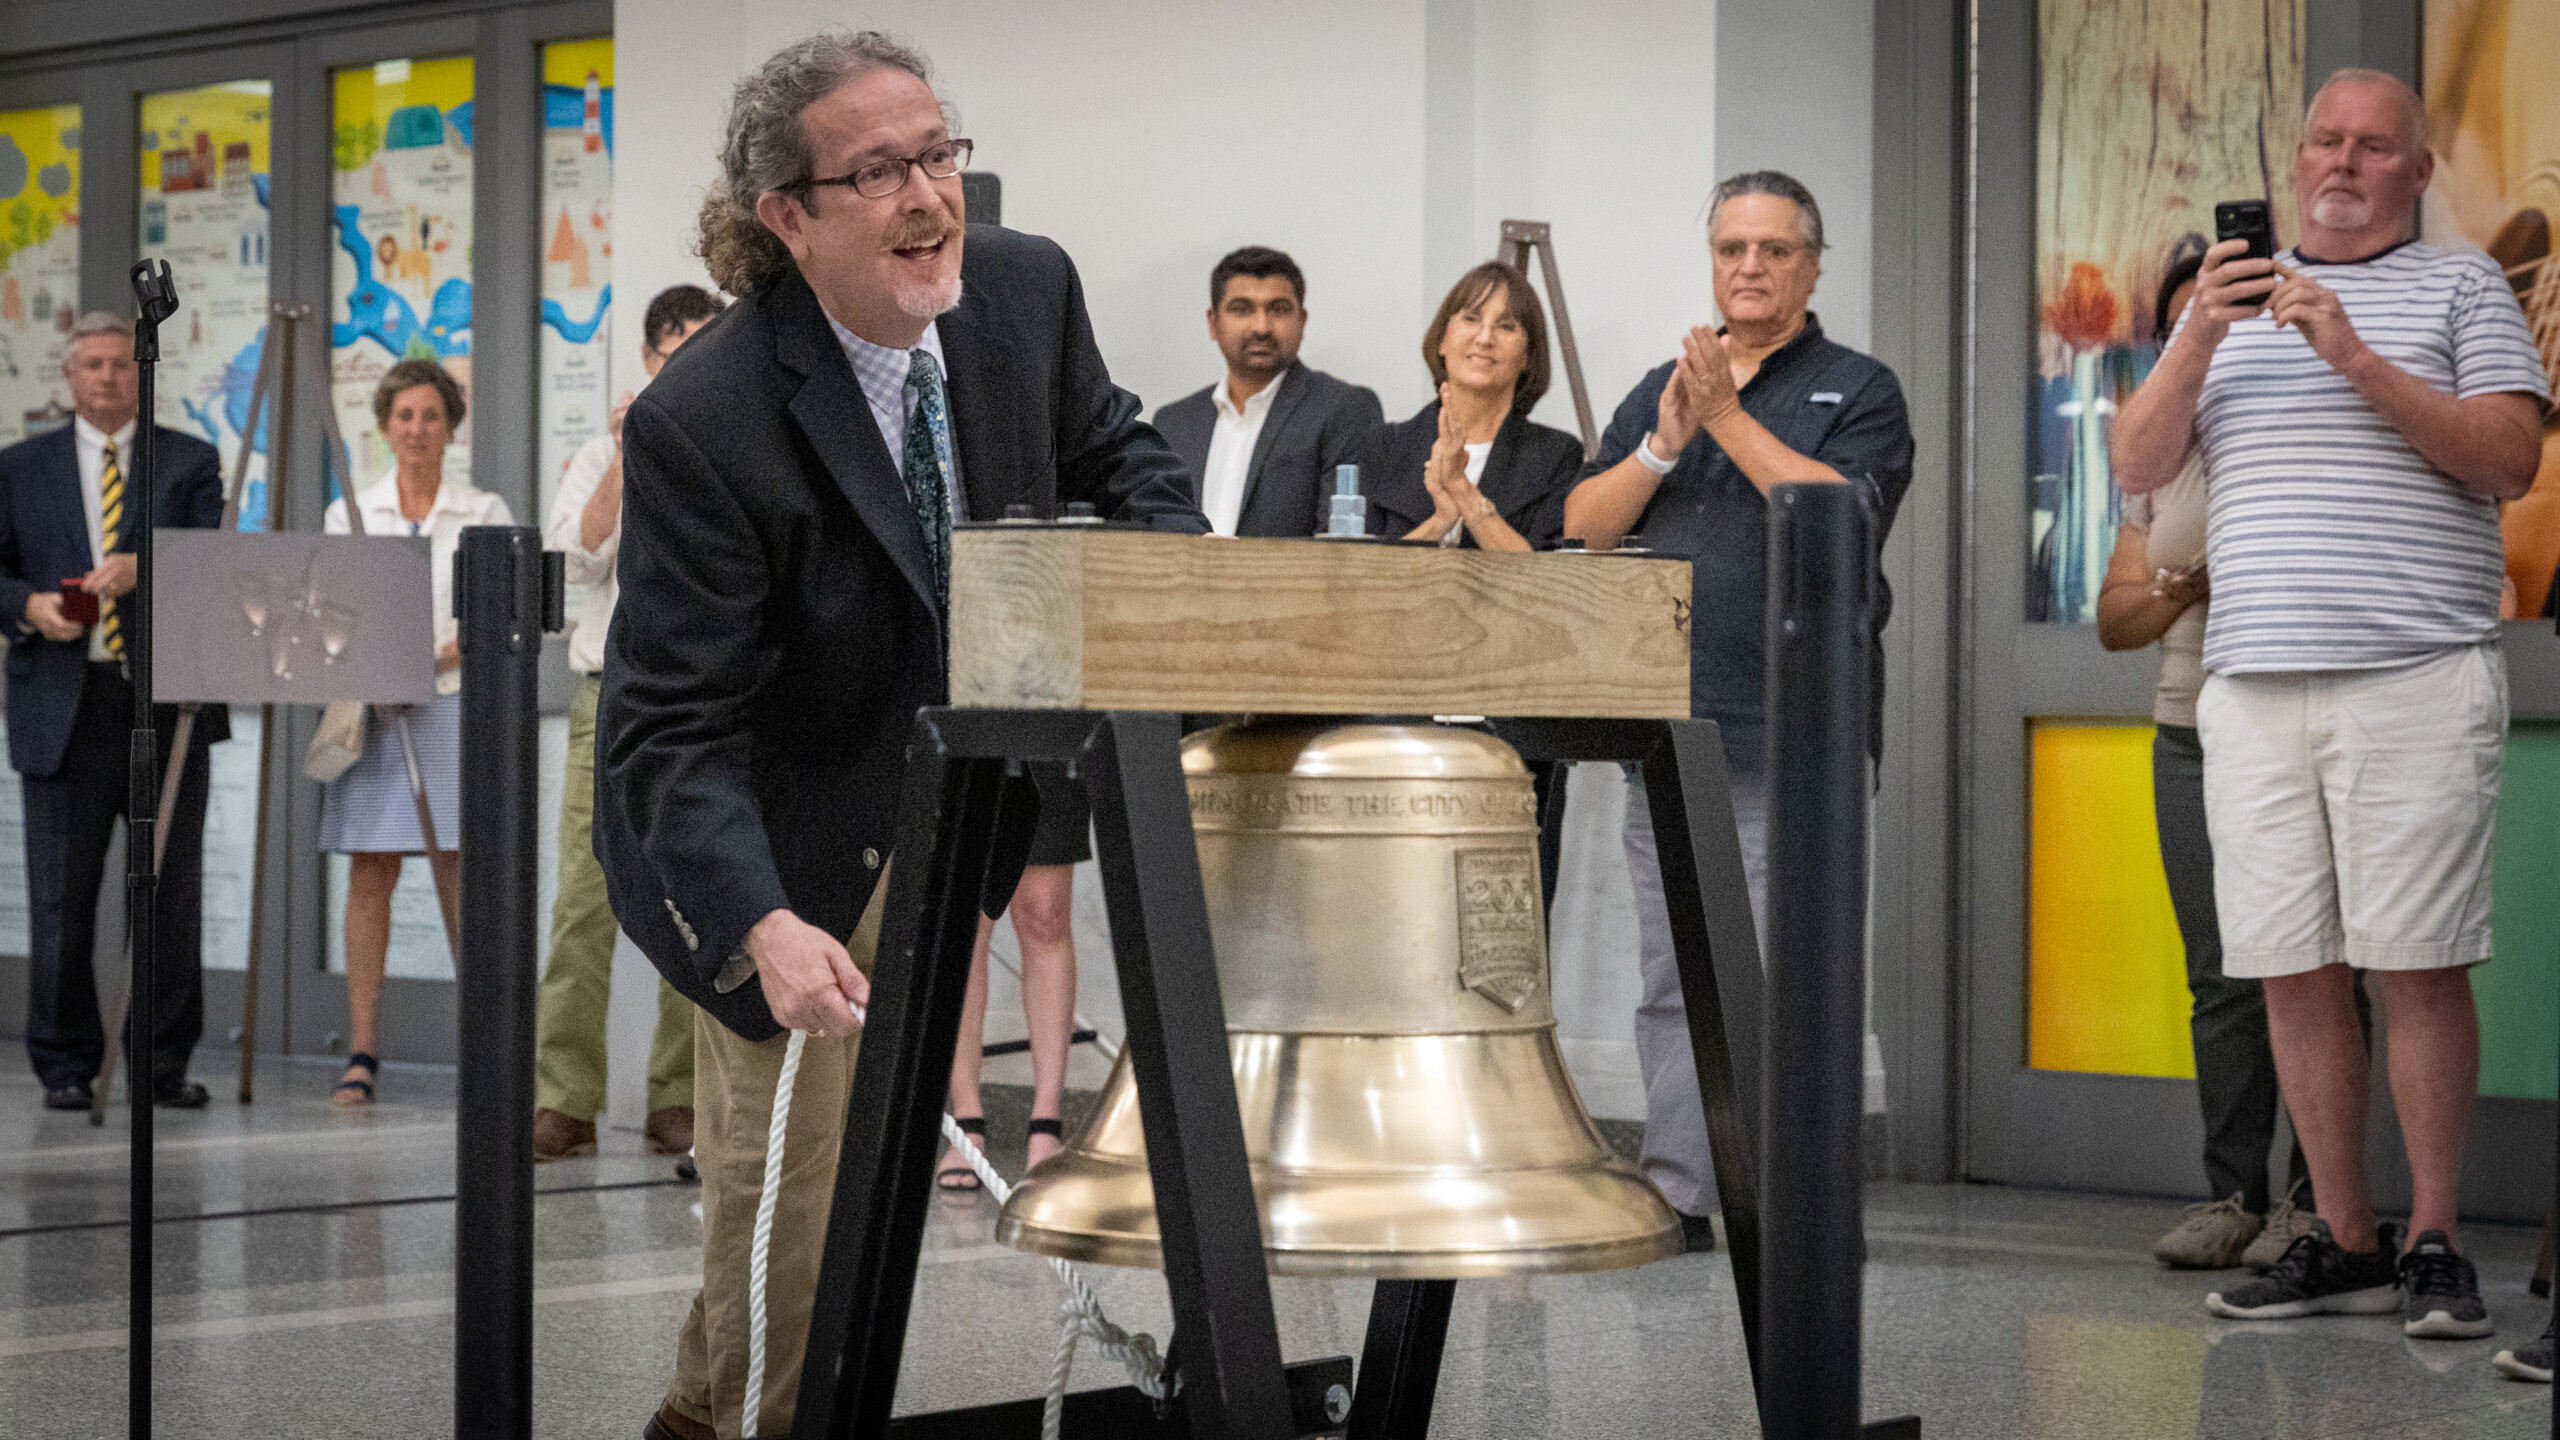 Featured image for “Jacksonville’s bicentennial celebrated with special bronze bell”